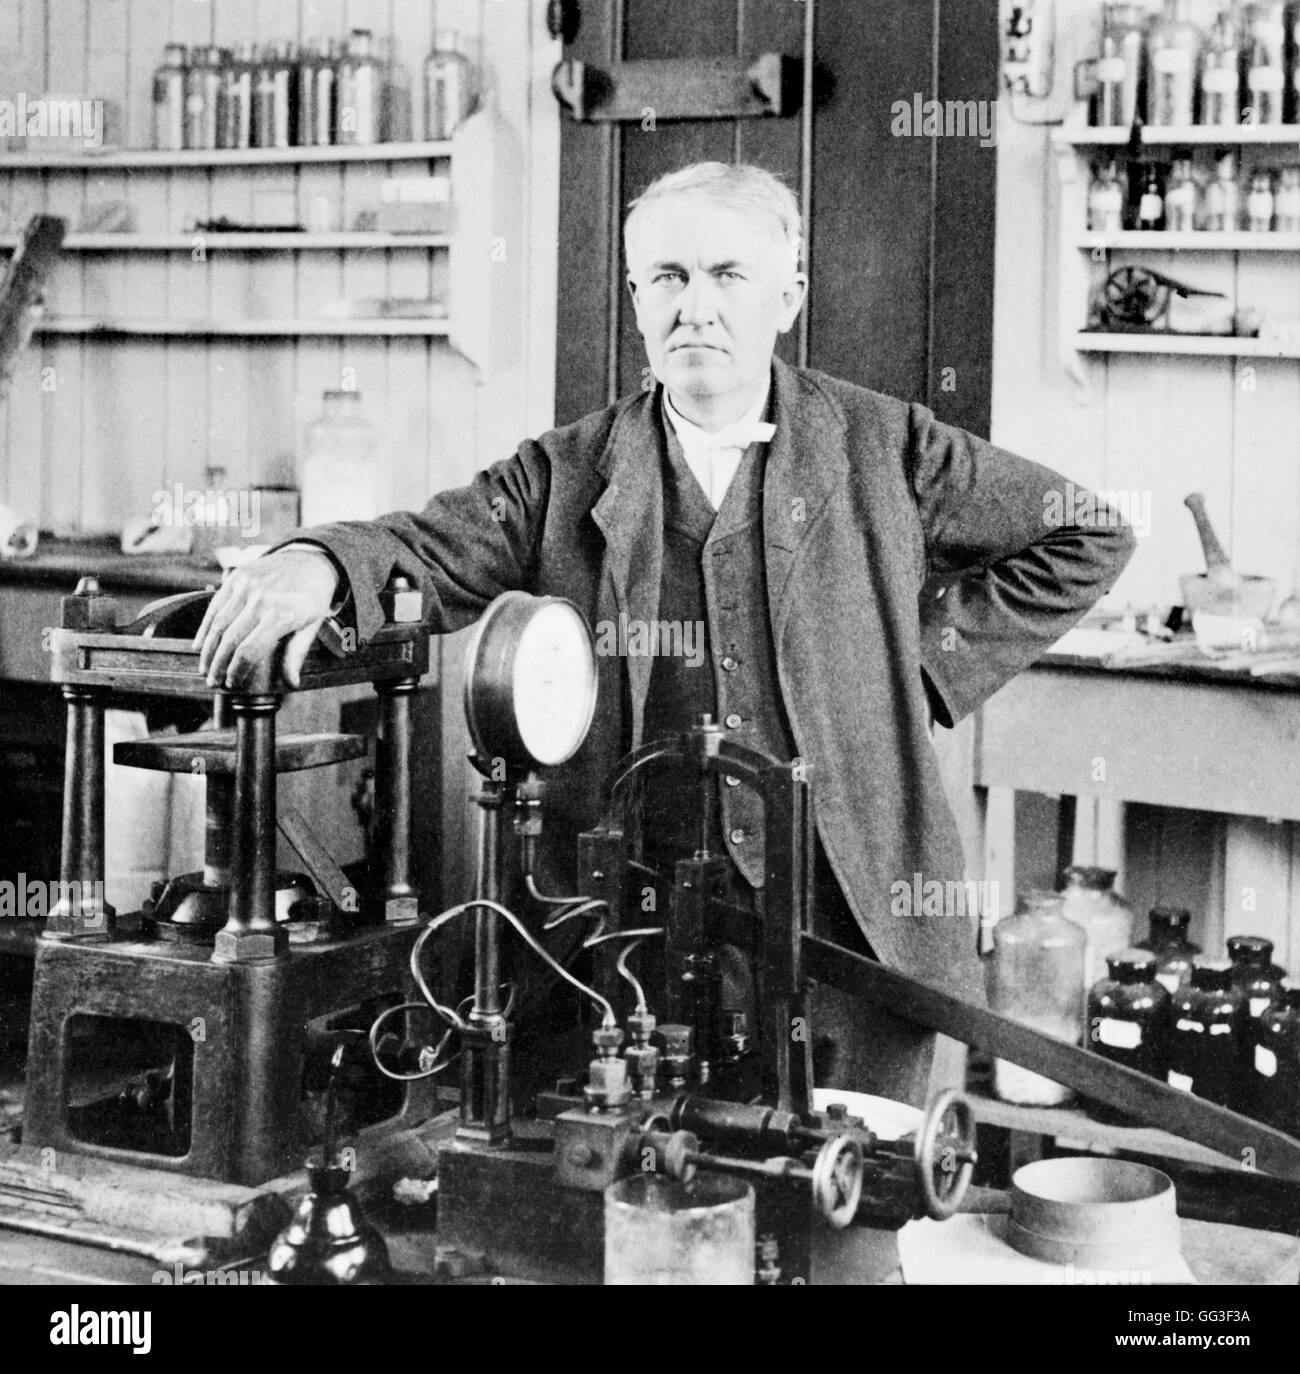 The American inventor and businessman,Thomas Edison (1847-1931), in his laboratory in East Orange, NJ, USA. Portrait by Underwood and Underwood, c.1901. Stock Photo